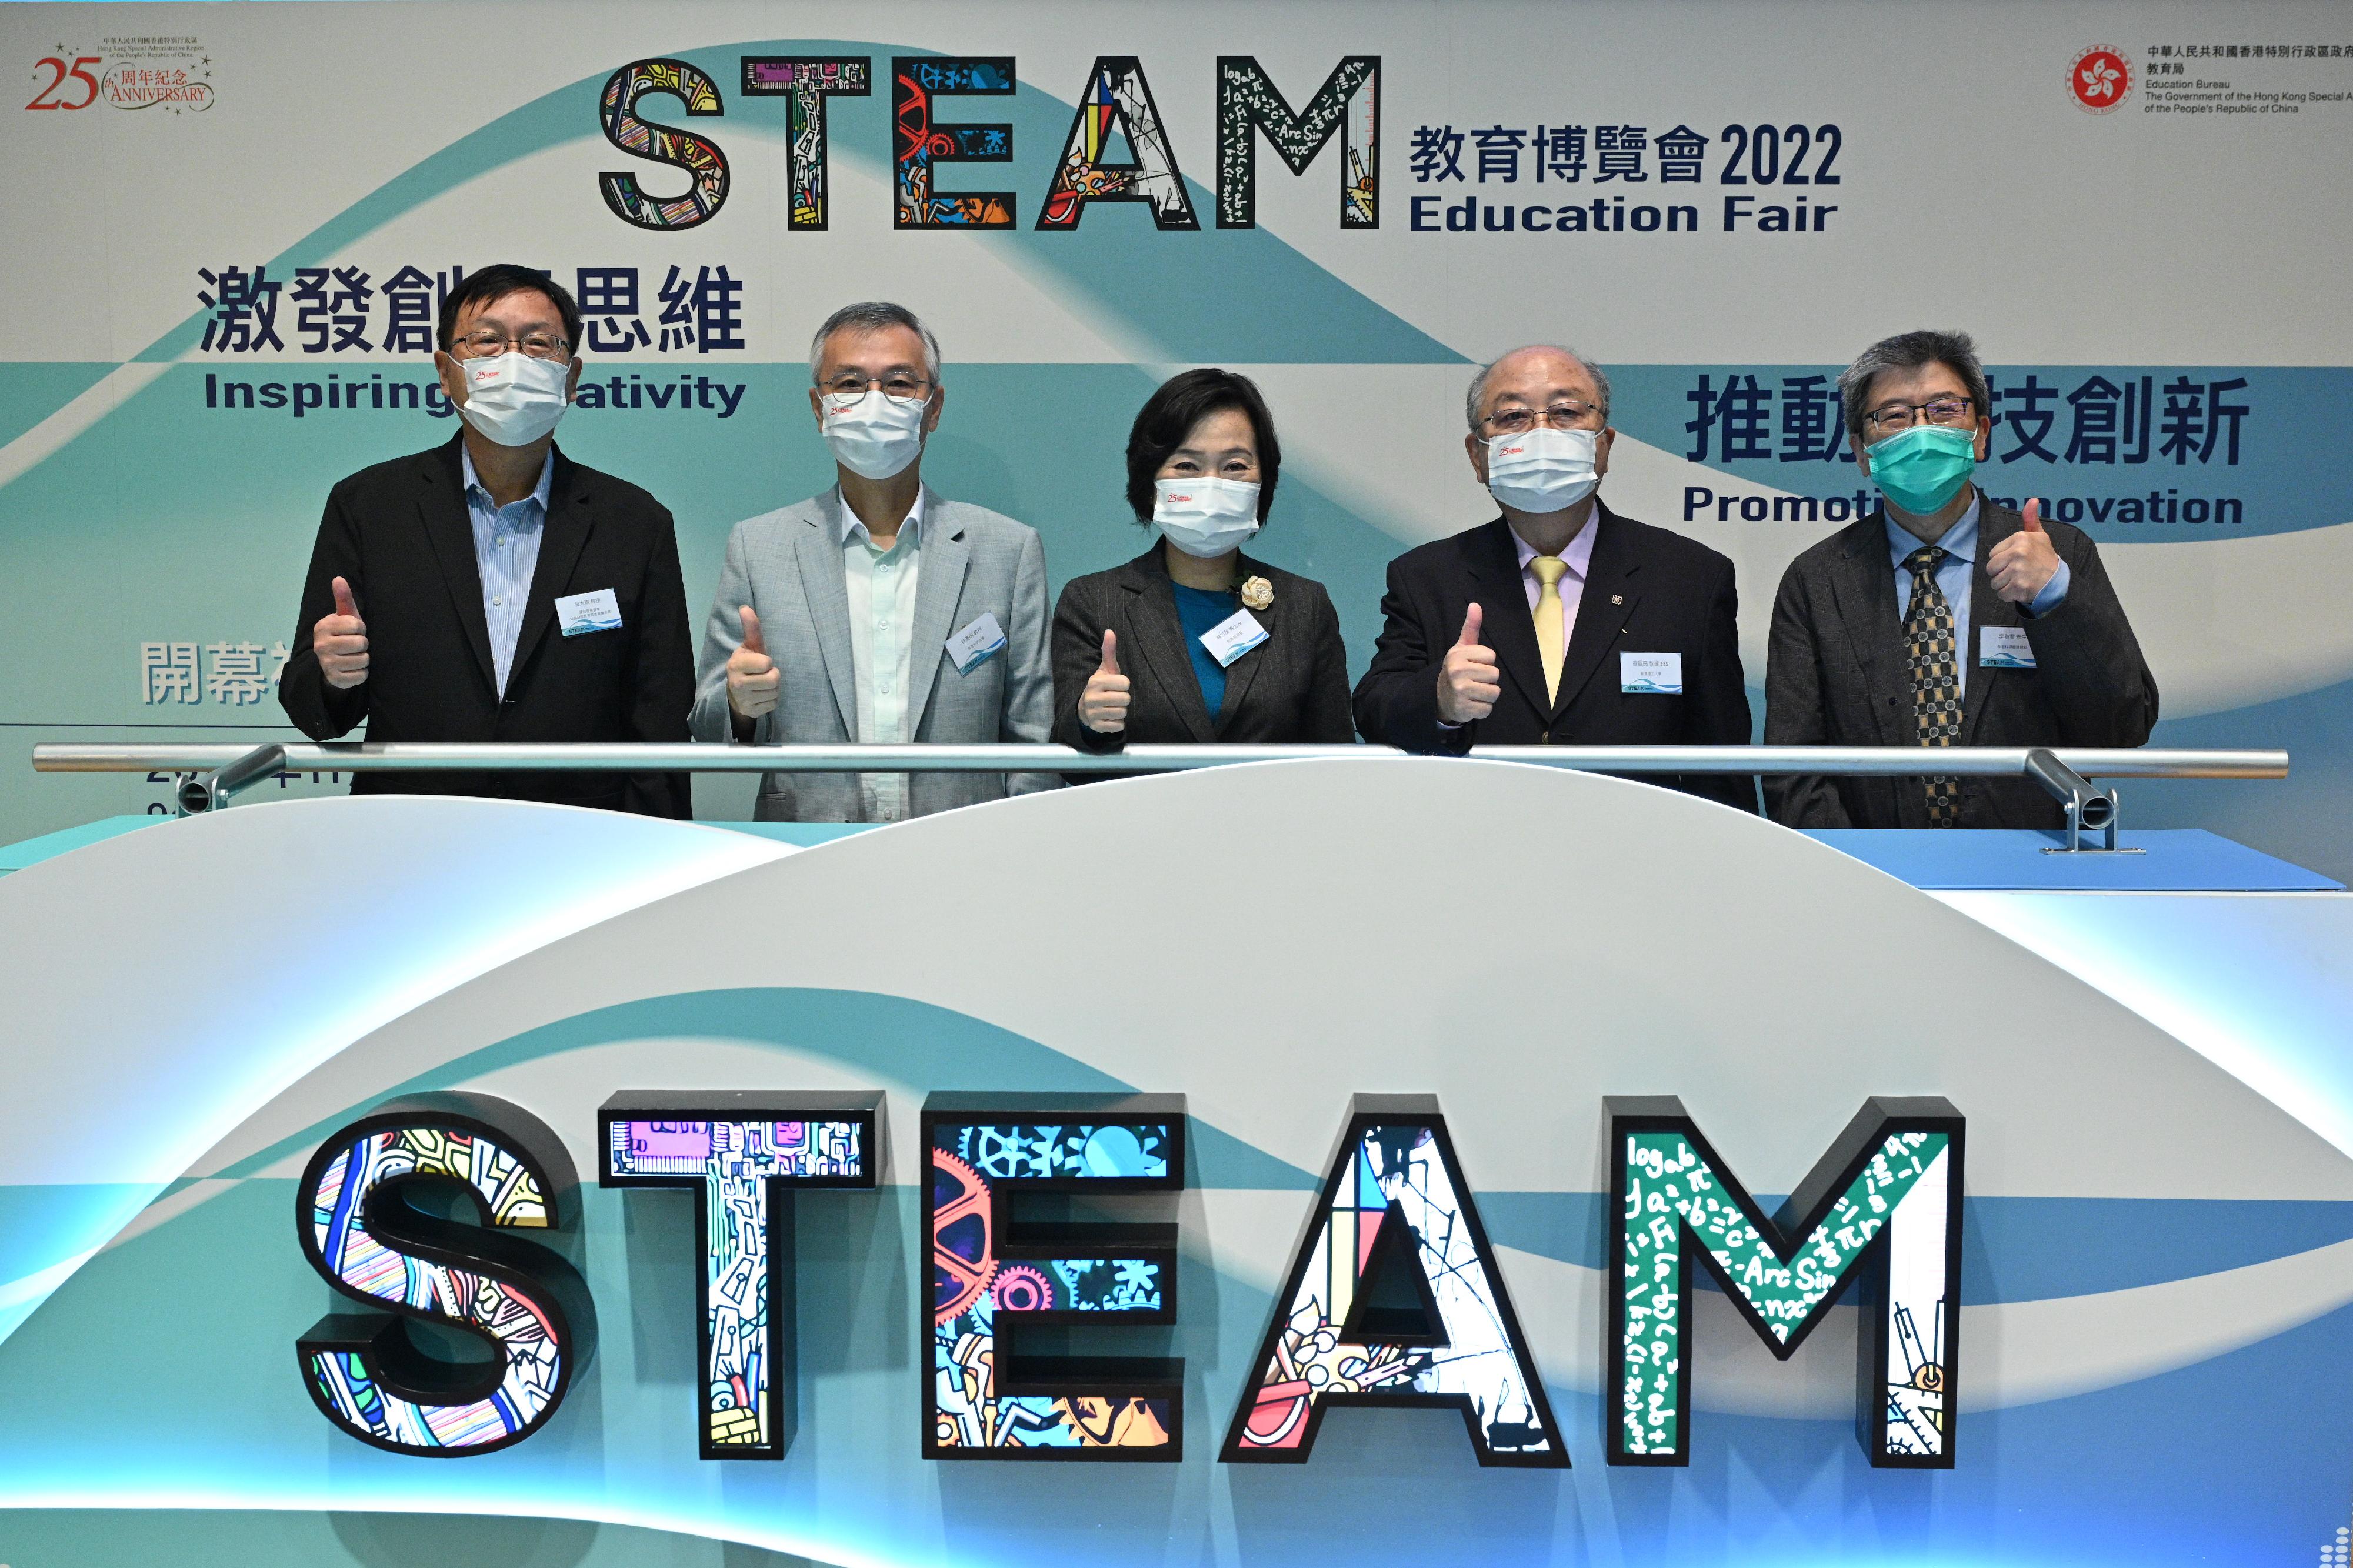 The Secretary for Education, Dr Choi Yuk-lin (centre), officiates at the opening ceremony of the STEAM Education Fair 2022 today (November 26) with other guests.